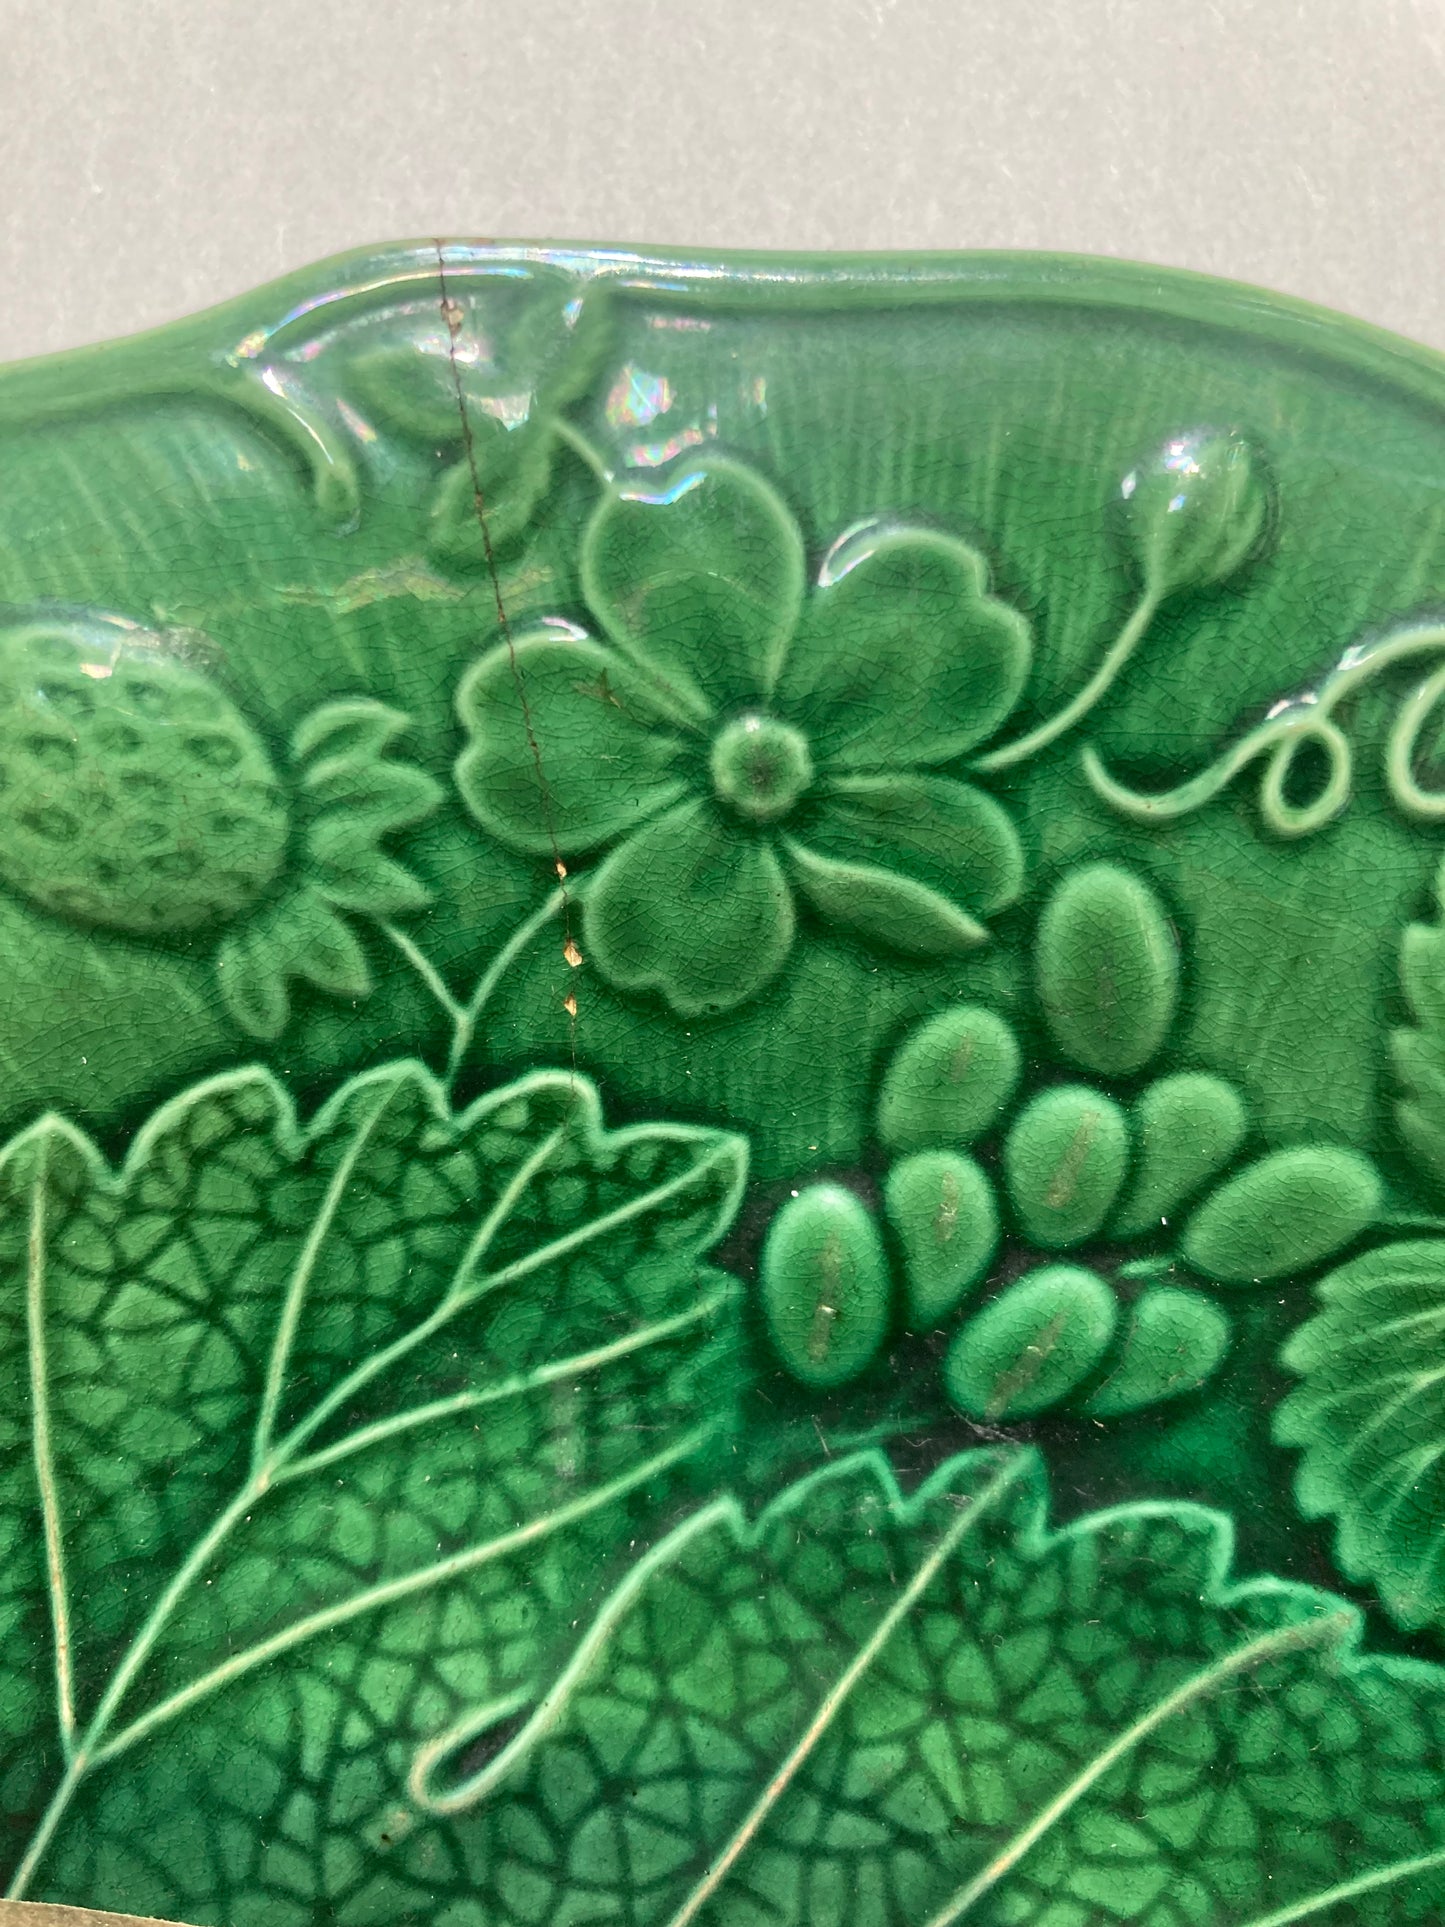 Victorian green leaf plates Group 1